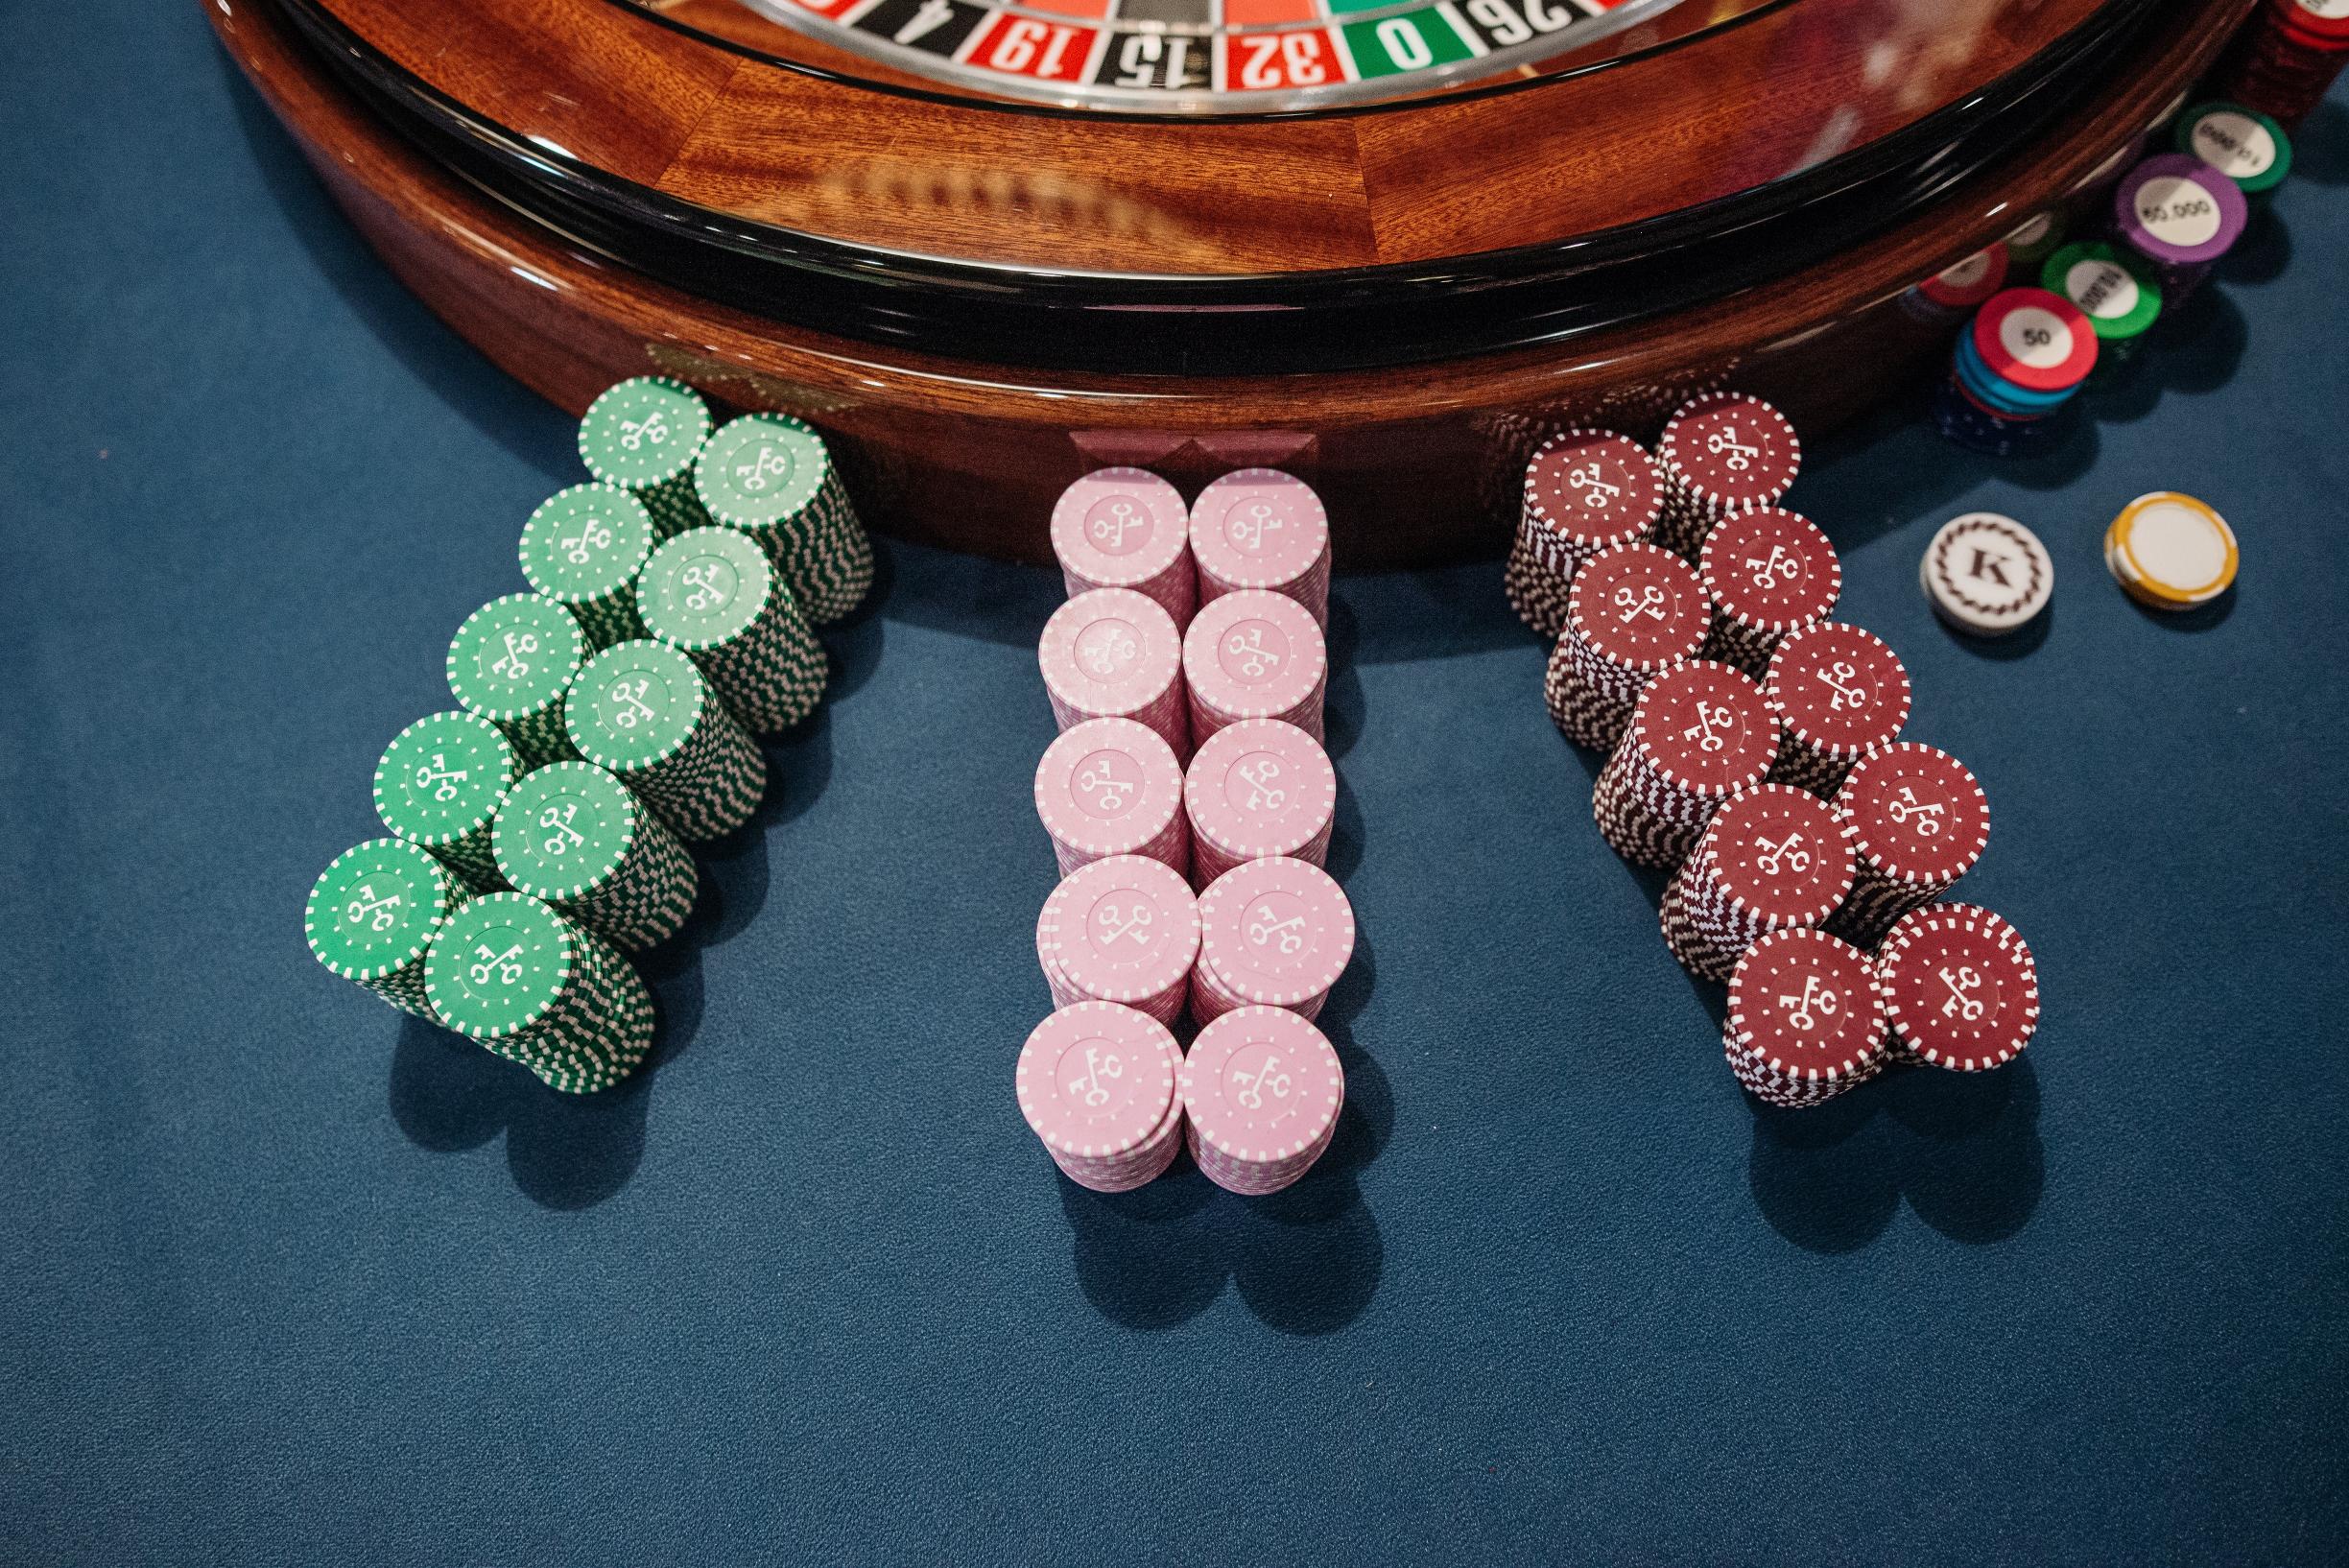 The Economics of Gambling: How it Benefits Both the Industry and the Government